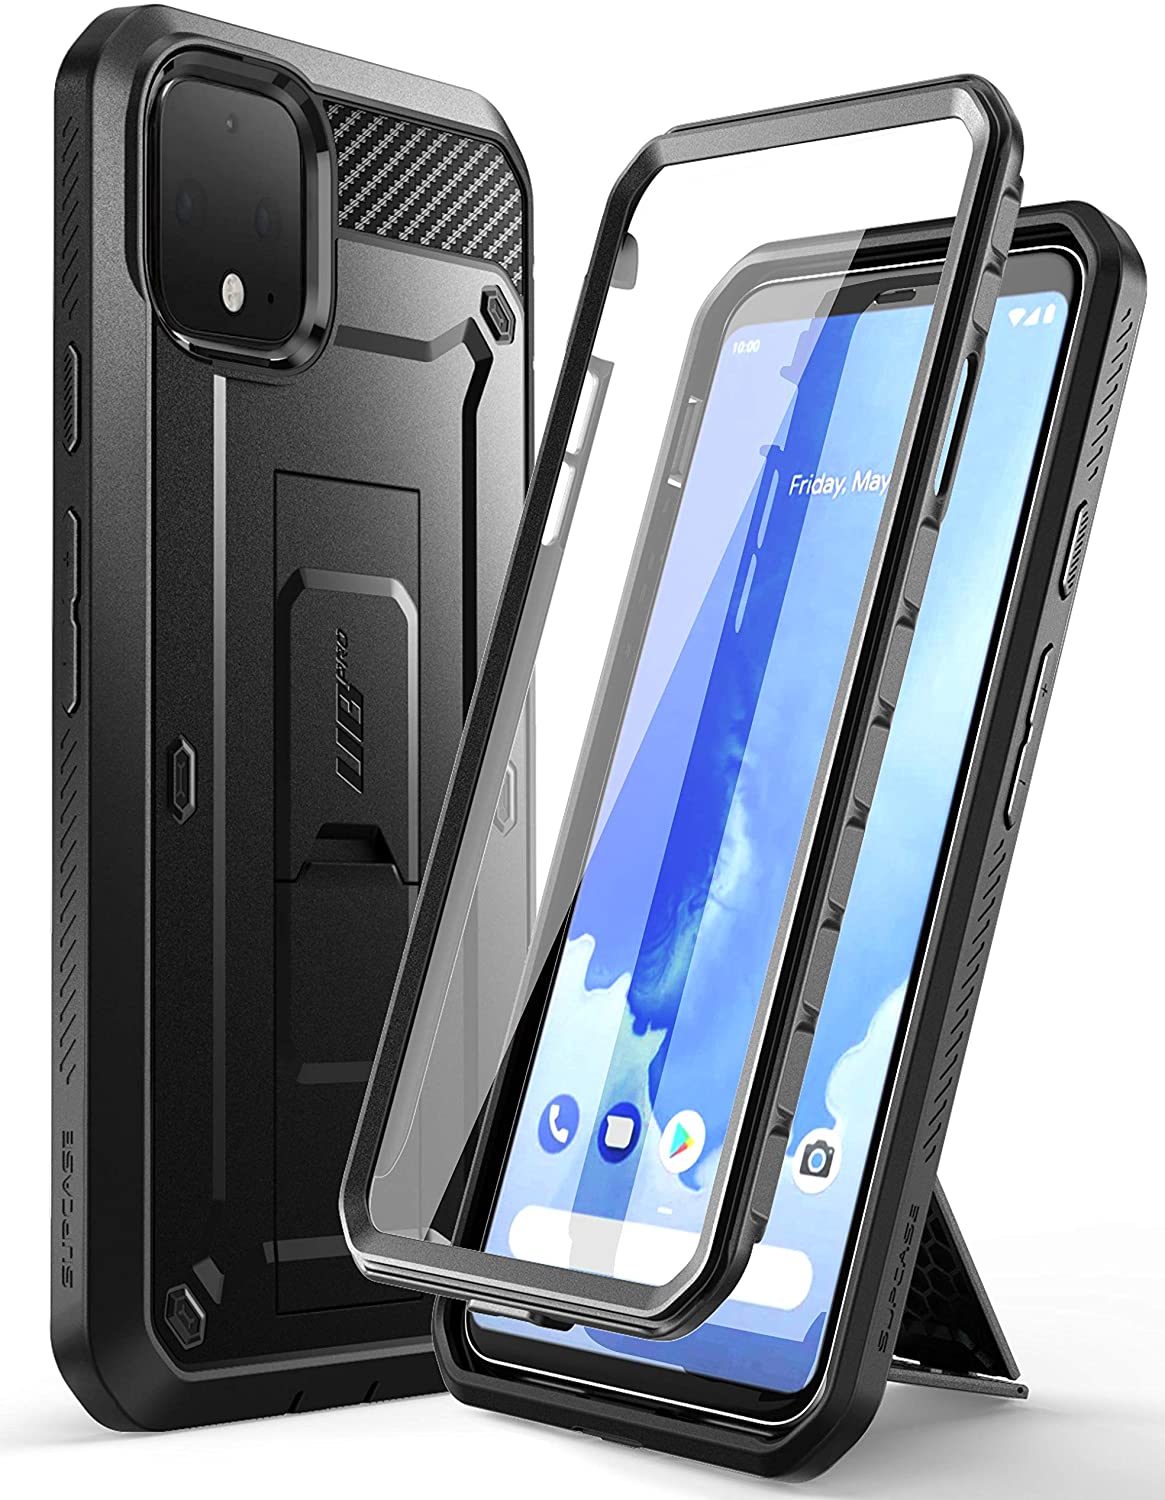 SUPCASE Unicorn Beetle Pro Google Pixel 4 XL Full-Body Rugged Holster Case with Built-in Screen Protector (Black)